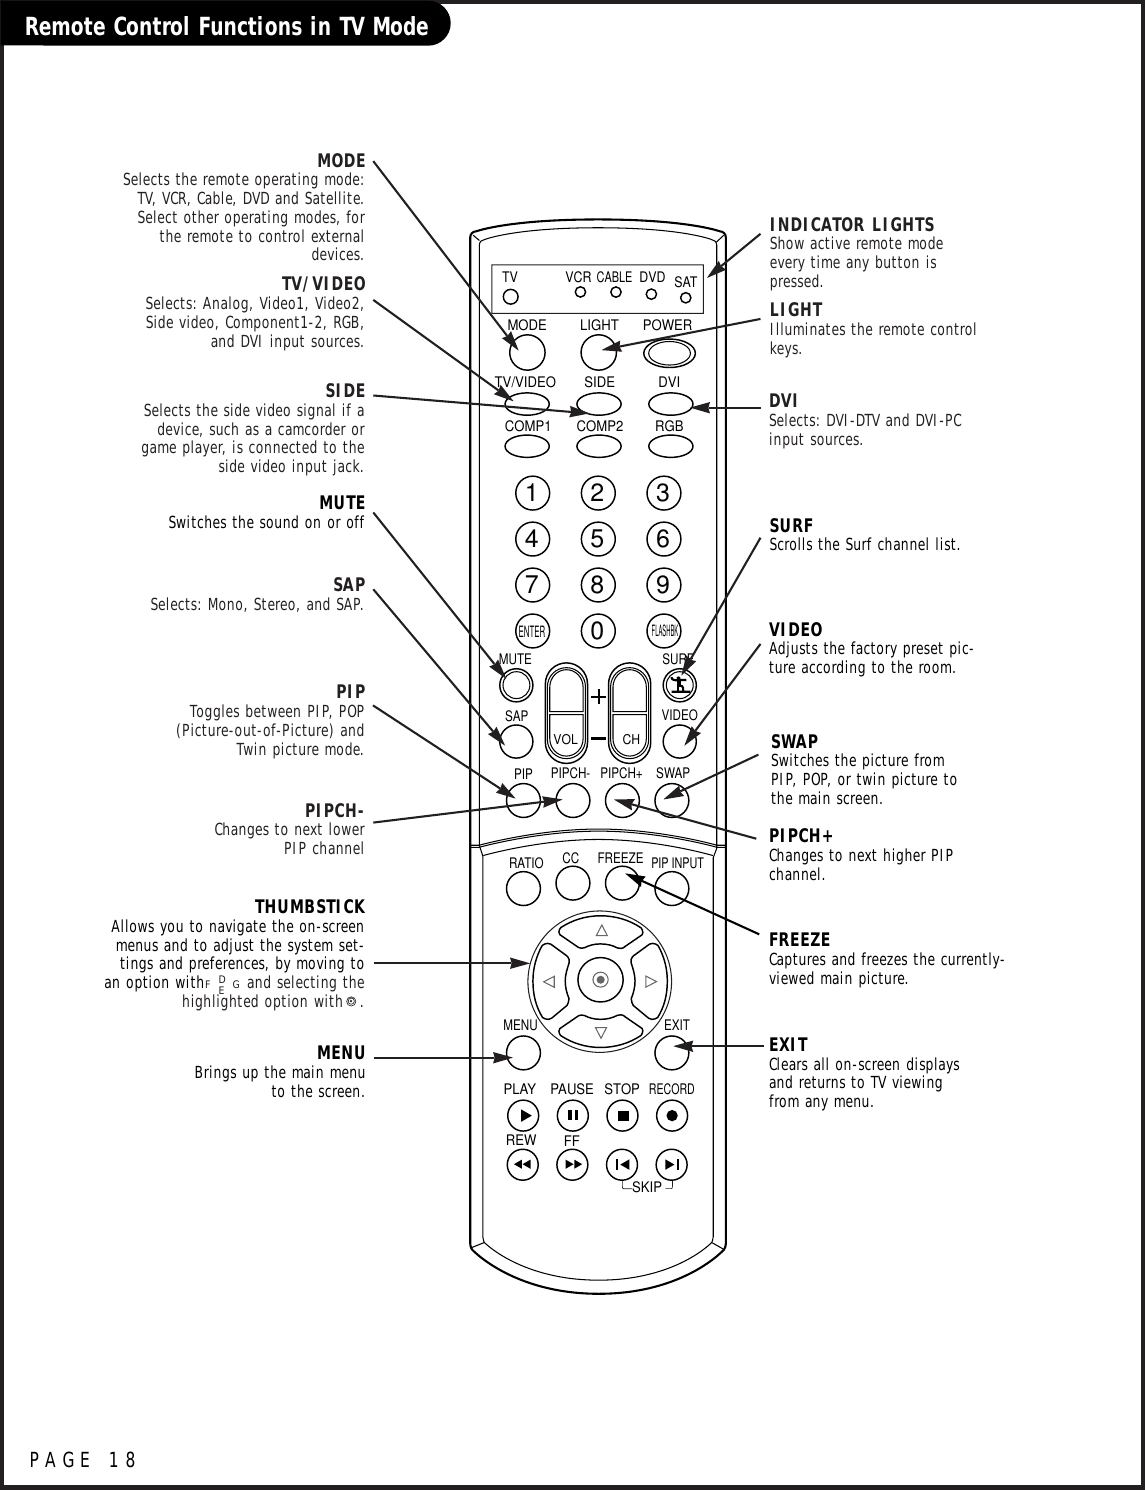 PAGE 18Remote Control Functions in TV Mode1234567890TVMODE LIGHT POWER   TV/VIDEO DVIRGBVCRCABLEDVD SATMUTESWAPPIPCH- PIPCH+PIPRATIORECORDSTOPPAUSEREWPLAYFFMENU EXITCC FREEZEPIP INPUTVOL CHSURFSAP VIDEOCOMP2COMP1SIDESKIPENTERFLASHBKSURFScrolls the Surf channel list.MENUBrings up the main menuto the screen.EXITClears all on-screen displaysand returns to TV viewingfrom any menu.FREEZECaptures and freezes the currently-viewed main picture.VIDEOAdjusts the factory preset pic-ture according to the room.PIPCH+Changes to next higher PIPchannel.SWAPSwitches the picture fromPIP, POP, or twin picture tothe main screen.MUTESwitches the sound on or offTHUMBSTICKAllows you to navigate the on-screenmenus and to adjust the system set-tings and preferences, by moving toan option withF    G and selecting thehighlighted option with   . TV/VIDEOSelects: Analog, Video1, Video2,Side video, Component1-2, RGB,and DVI input sources.MODESelects the remote operating mode:TV, VCR, Cable, DVD and Satellite.Select other operating modes, forthe remote to control externaldevices.SIDESelects the side video signal if adevice, such as a camcorder orgame player, is connected to theside video input jack.DVISelects: DVI-DTV and DVI-PCinput sources.SAPSelects: Mono, Stereo, and SAP.PIPCH-Changes to next lowerPIP channelPIPToggles between PIP, POP(Picture-out-of-Picture) andTwin picture mode.LIGHTIlluminates the remote controlkeys.INDICATOR LIGHTSShow active remote modeevery time any button ispressed.DE